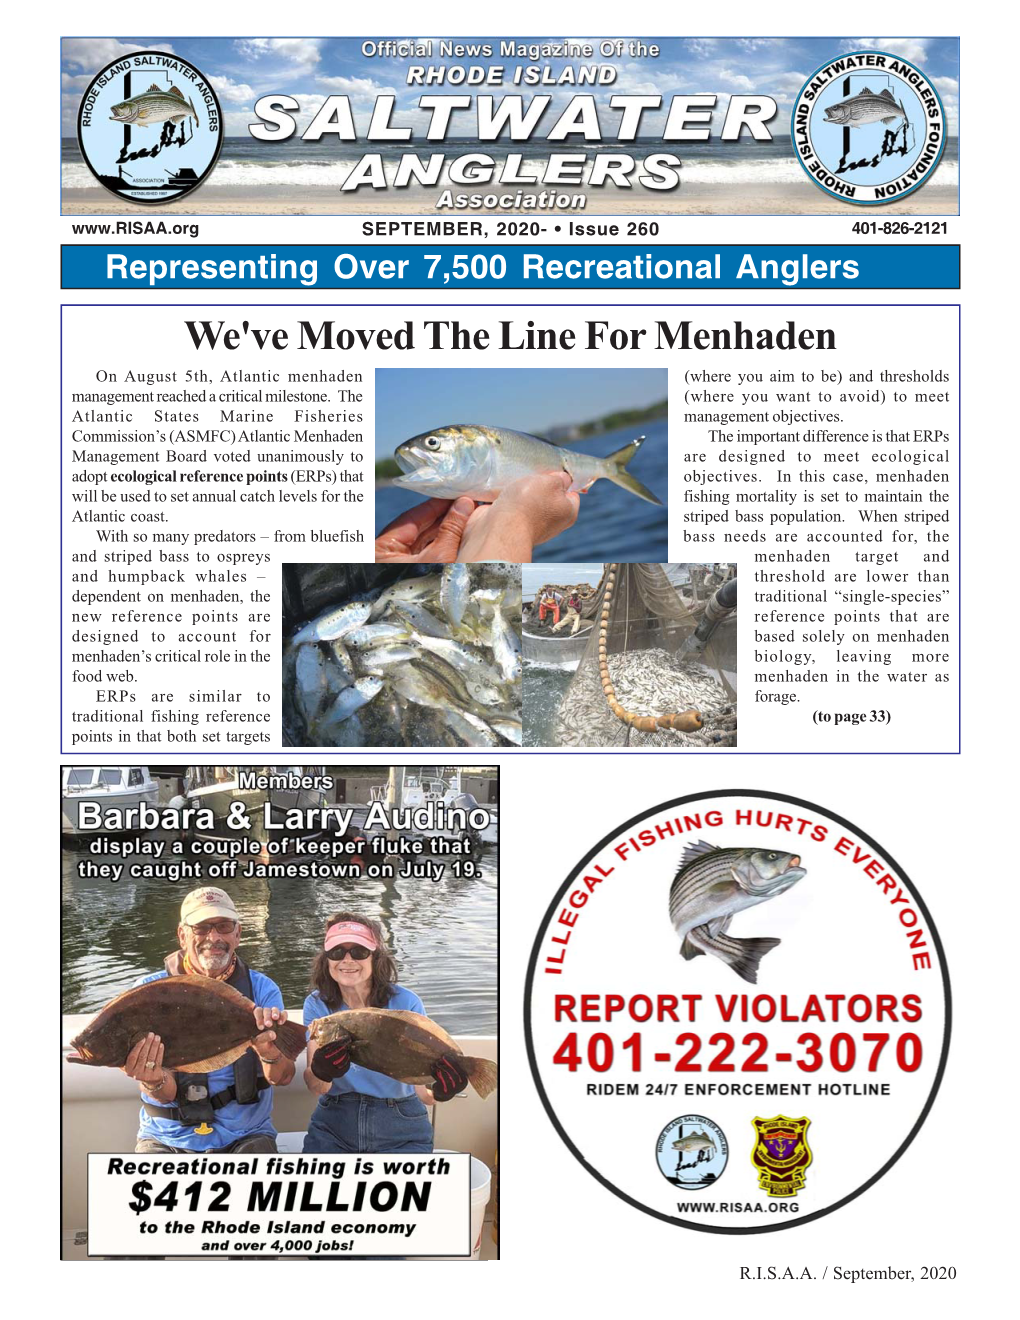 We've Moved the Line for Menhaden on August 5Th, Atlantic Menhaden (Where You Aim to Be) and Thresholds Management Reached a Critical Milestone